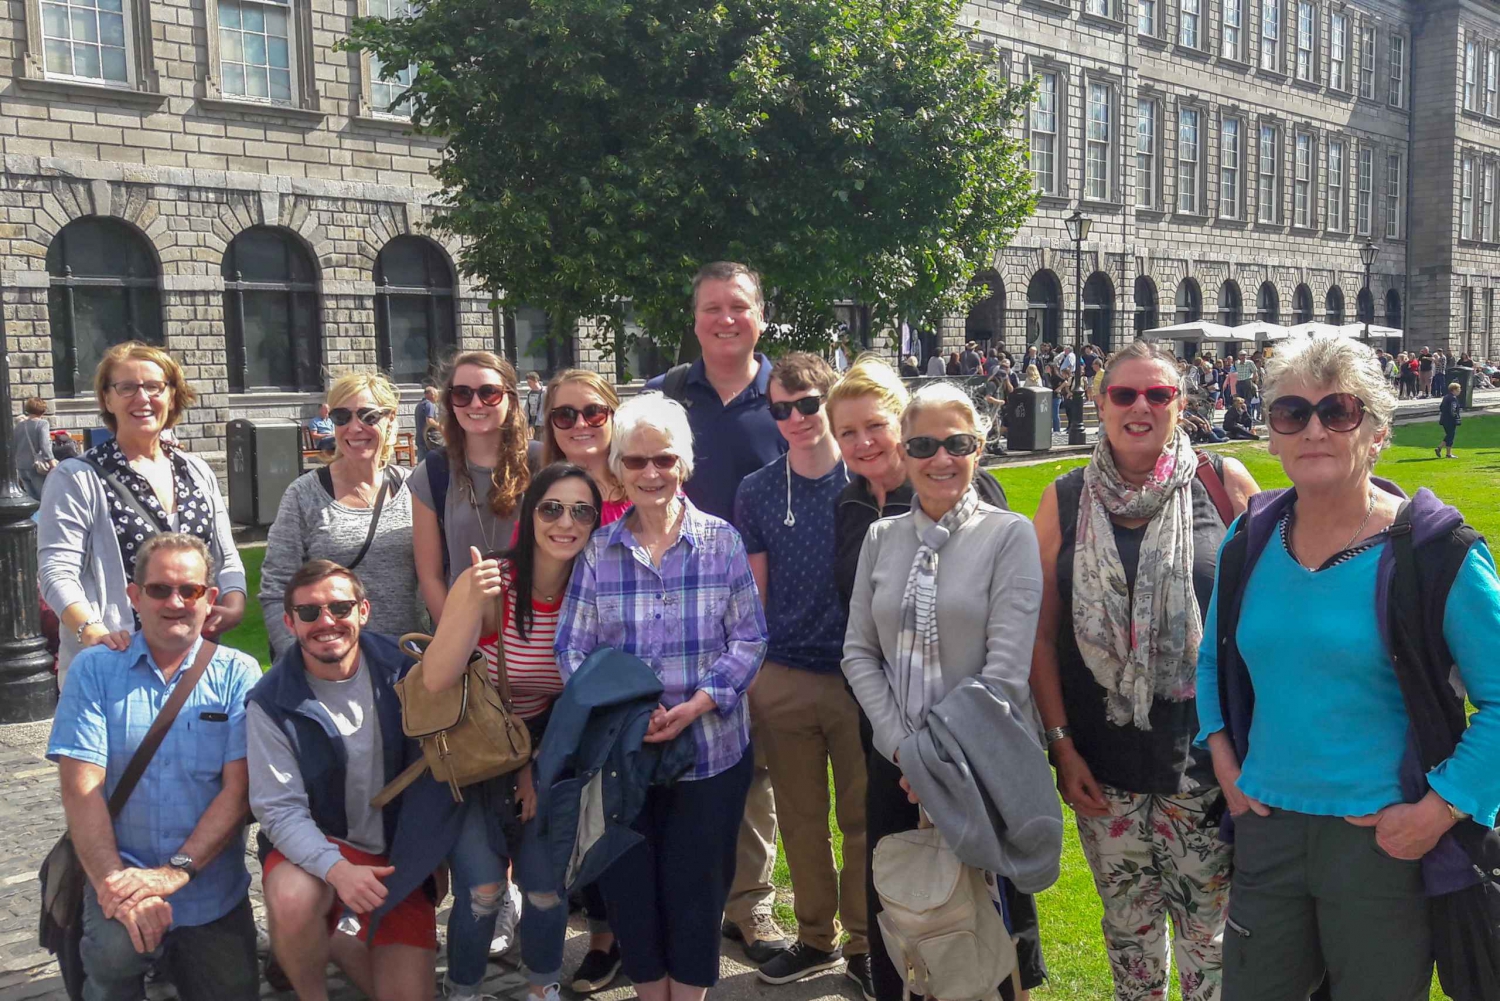 Fast-Track Access Book of Kells and Dublin Castle Tour